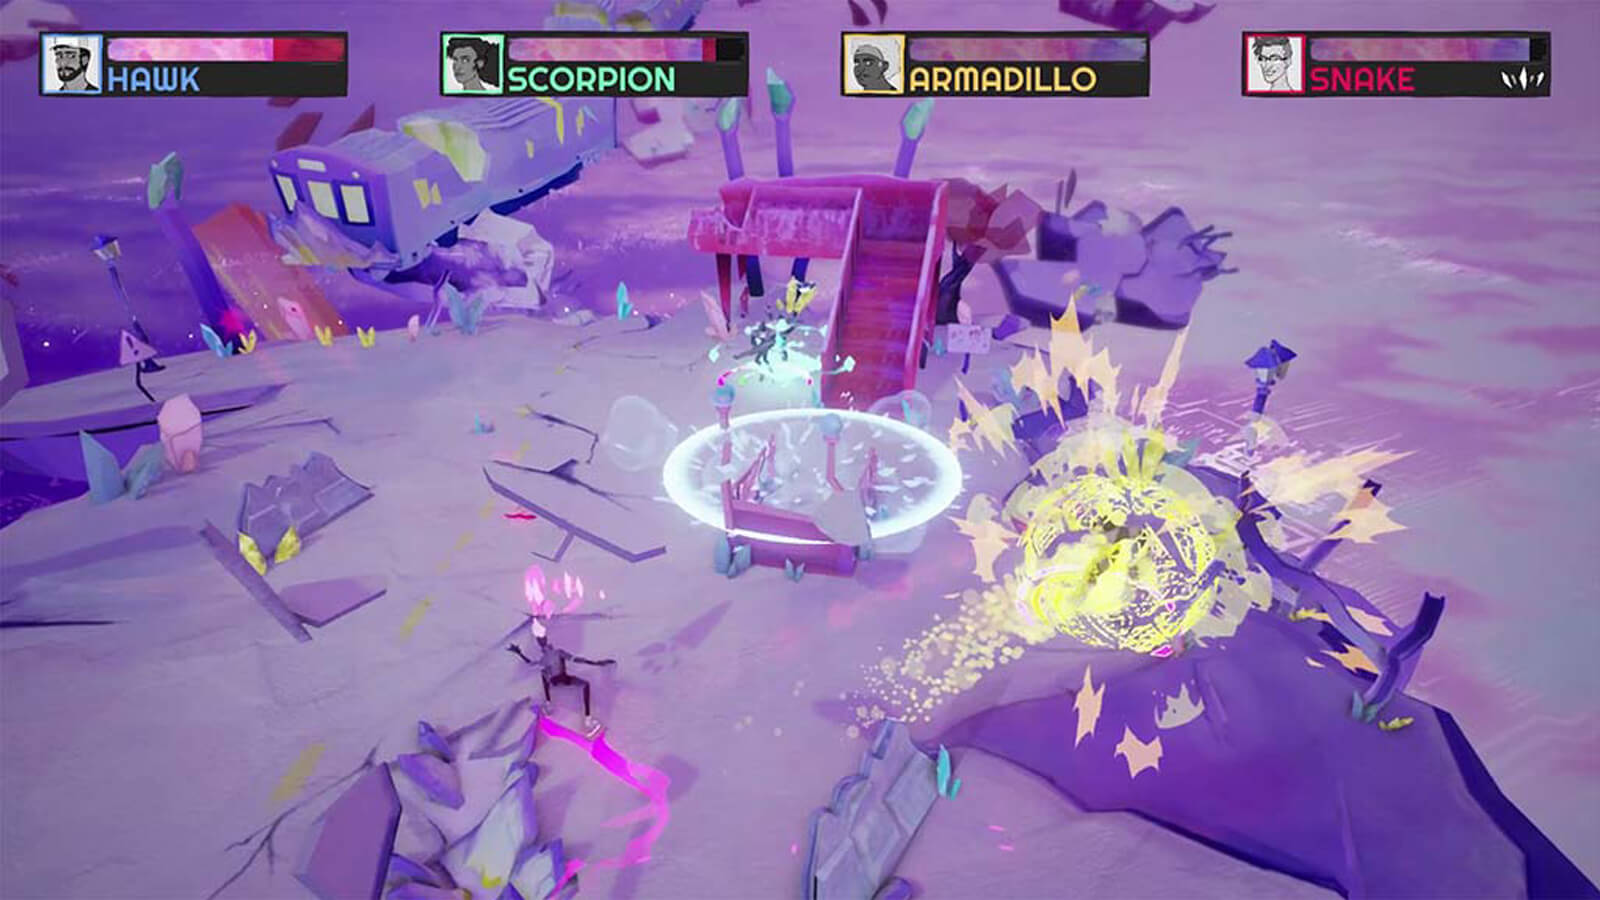 Four players battle on a craggy purple stage, yellow and turquoise explosions in the distance.